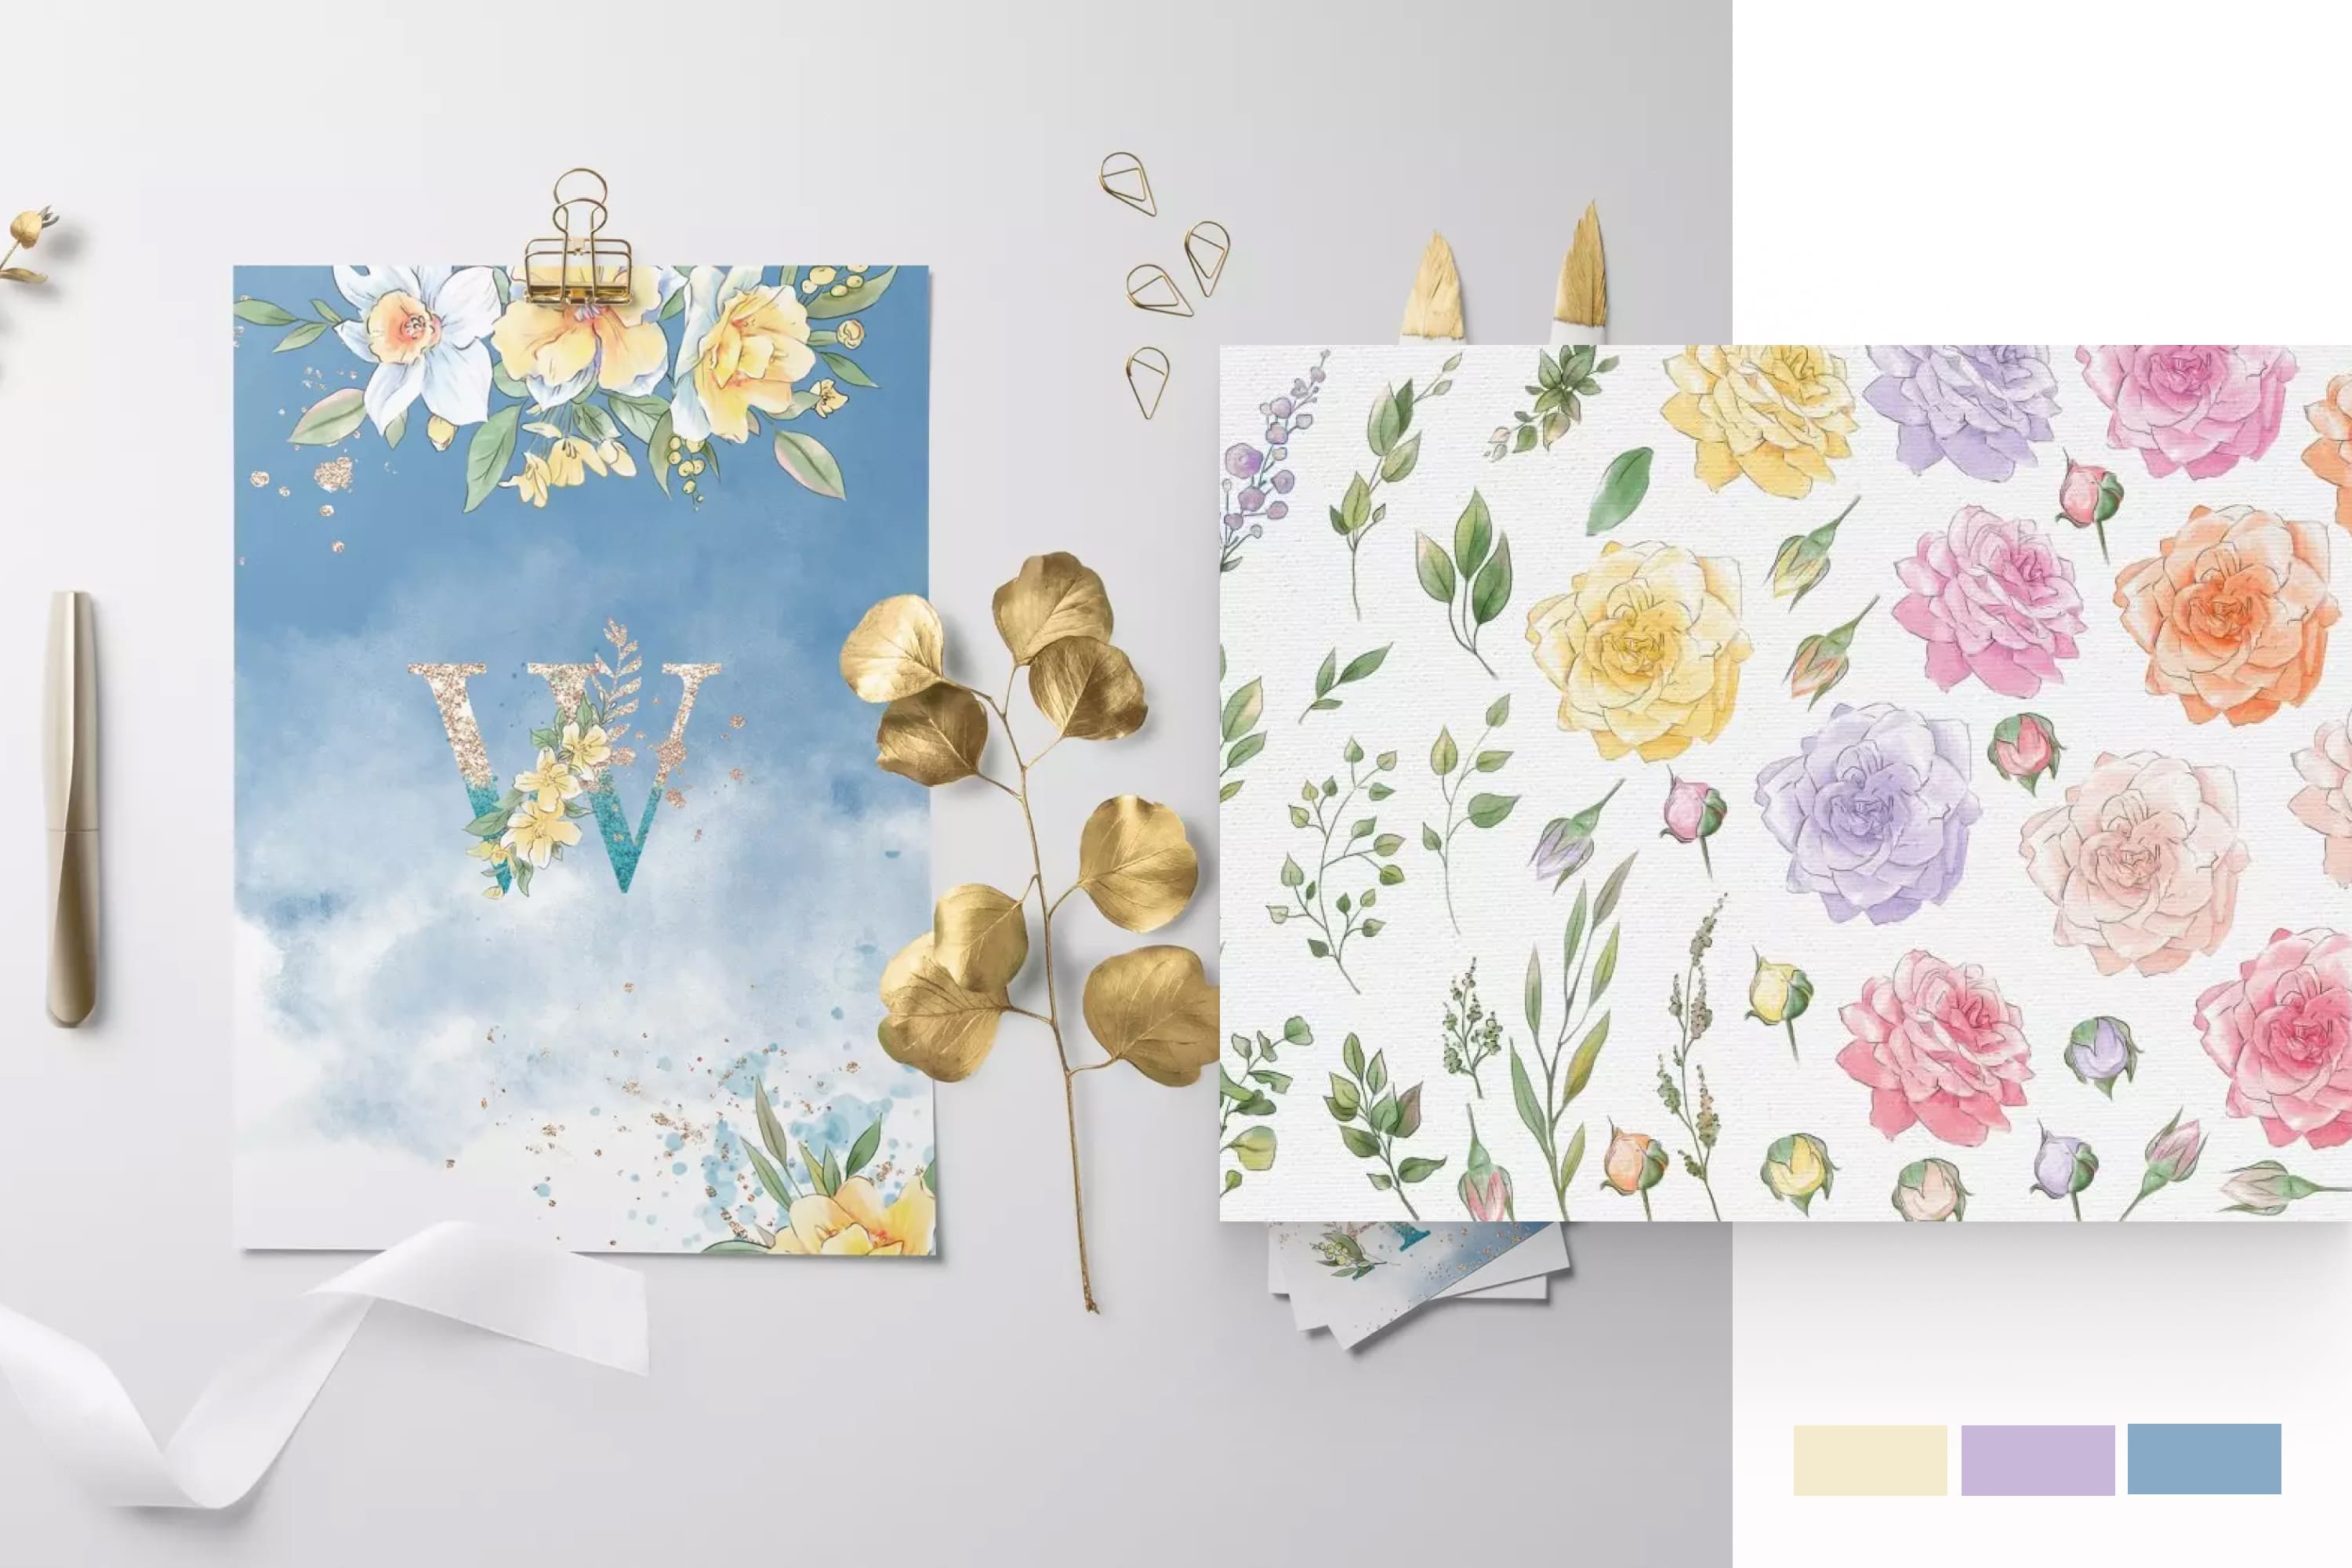 Collage of images of watercolor flowers and sky.